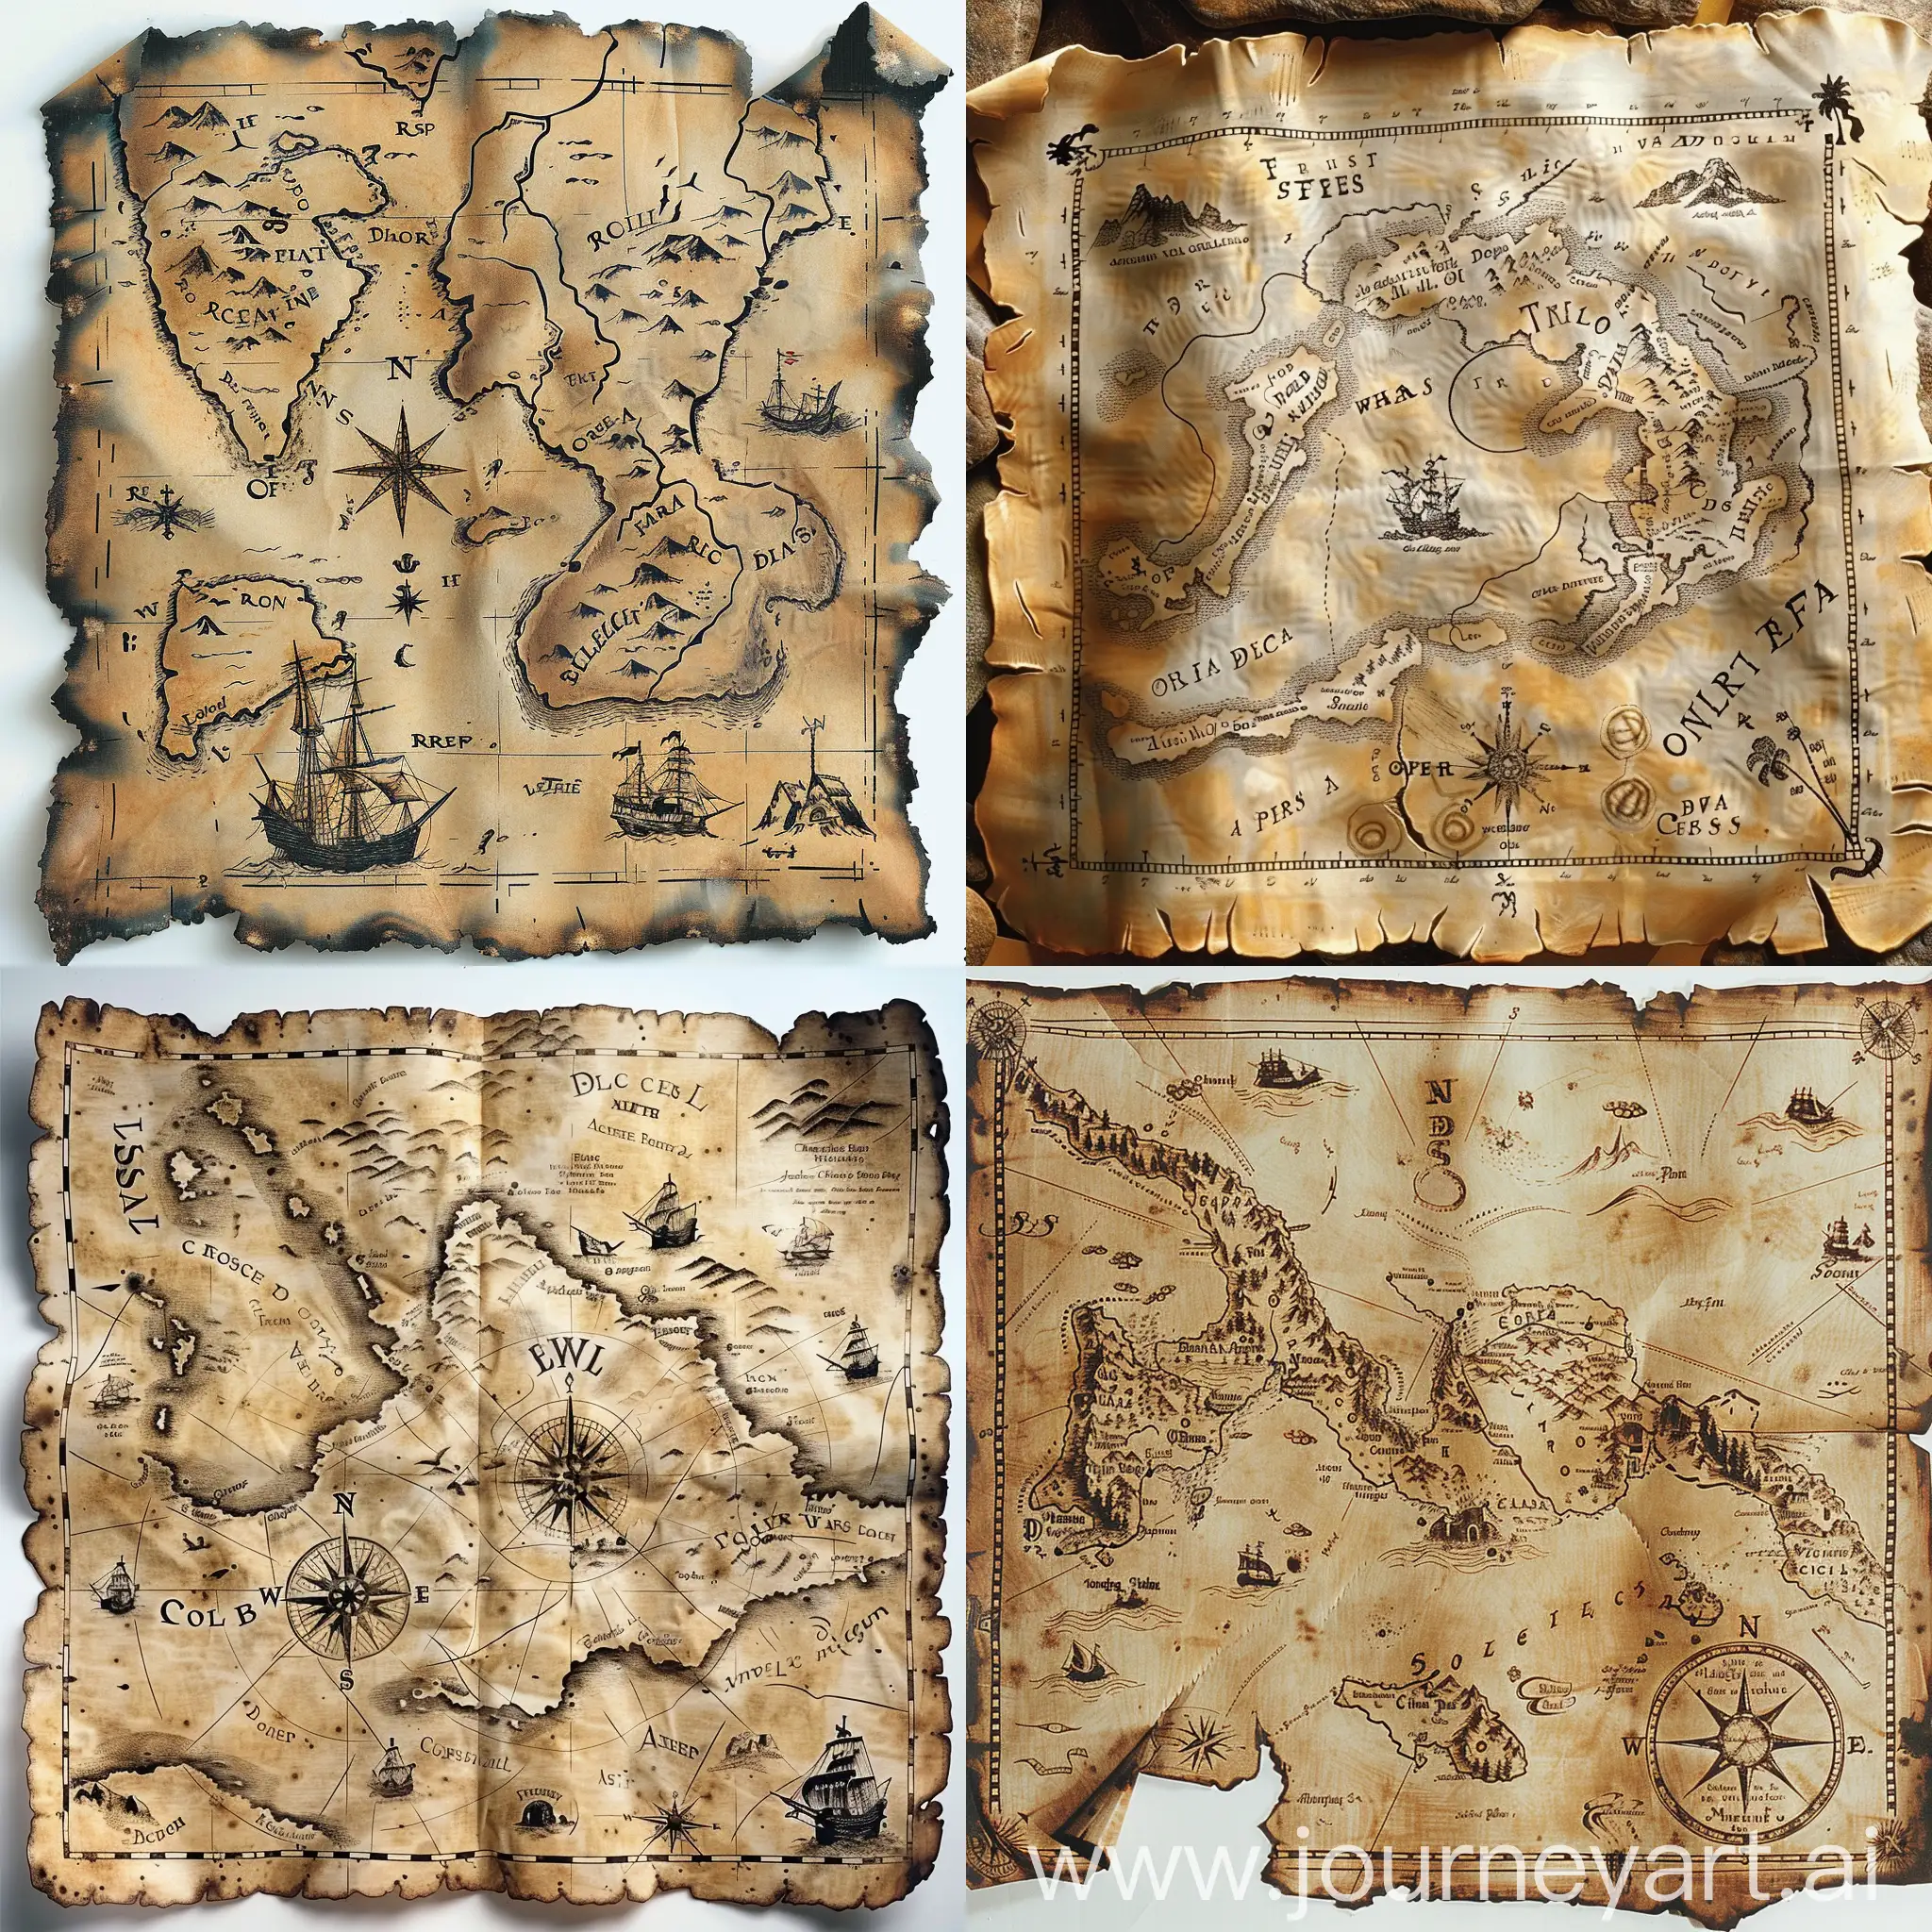 An amazingly detailed and aged, pirates treasure map